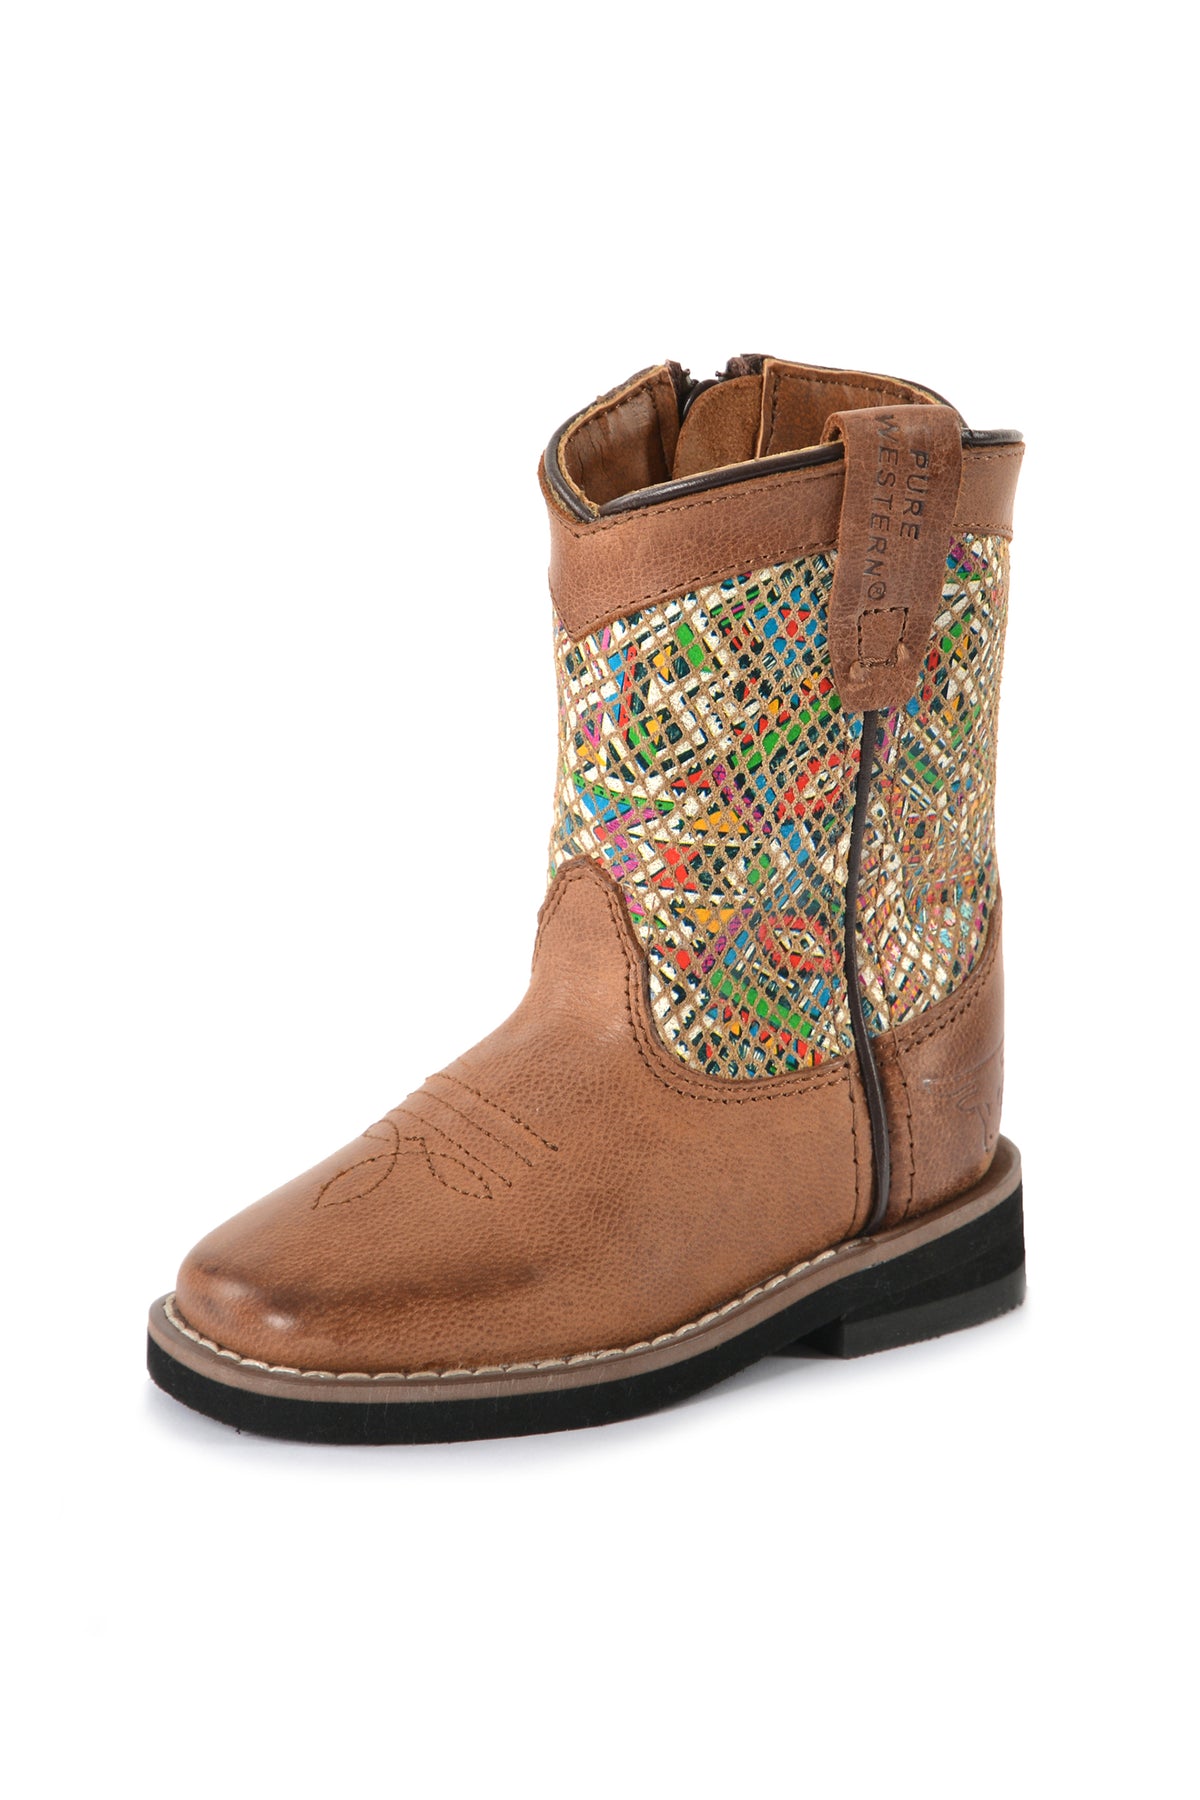 Pure Western Toddlers Dusty Boot - Brown/Multi